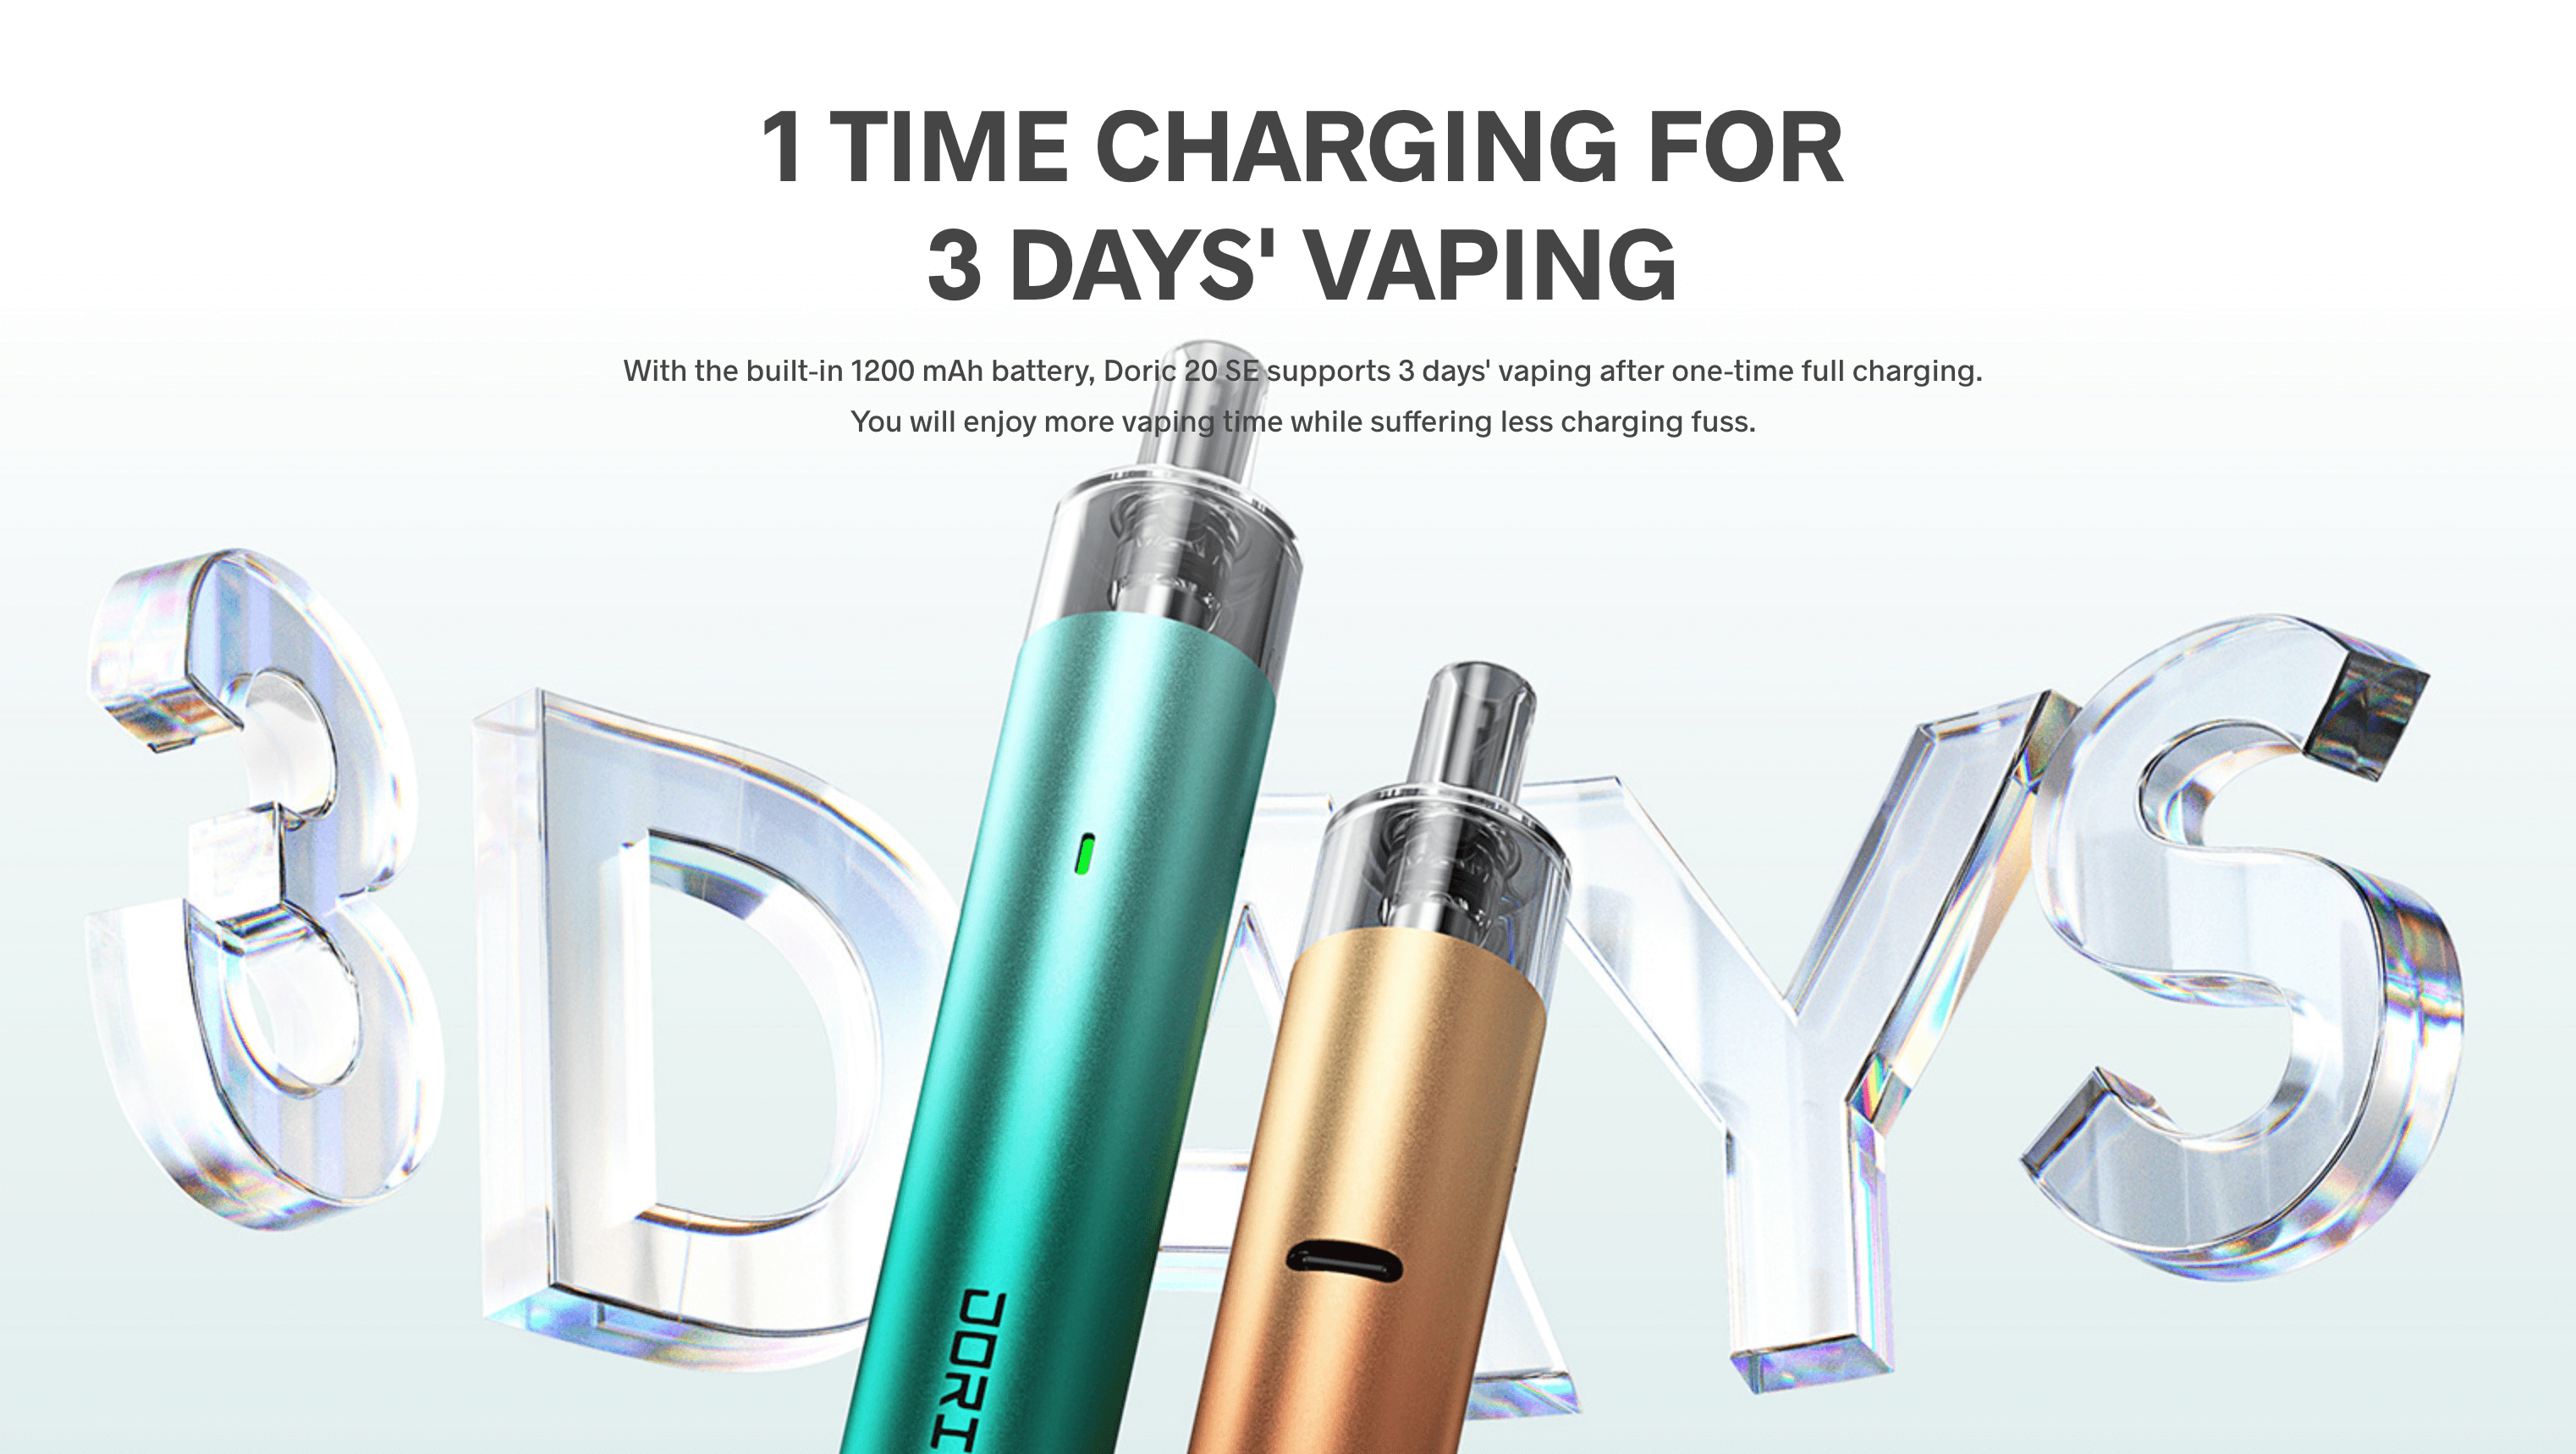 Voopoo Doric 20SE Kit - 3 days of vaping on a single charge